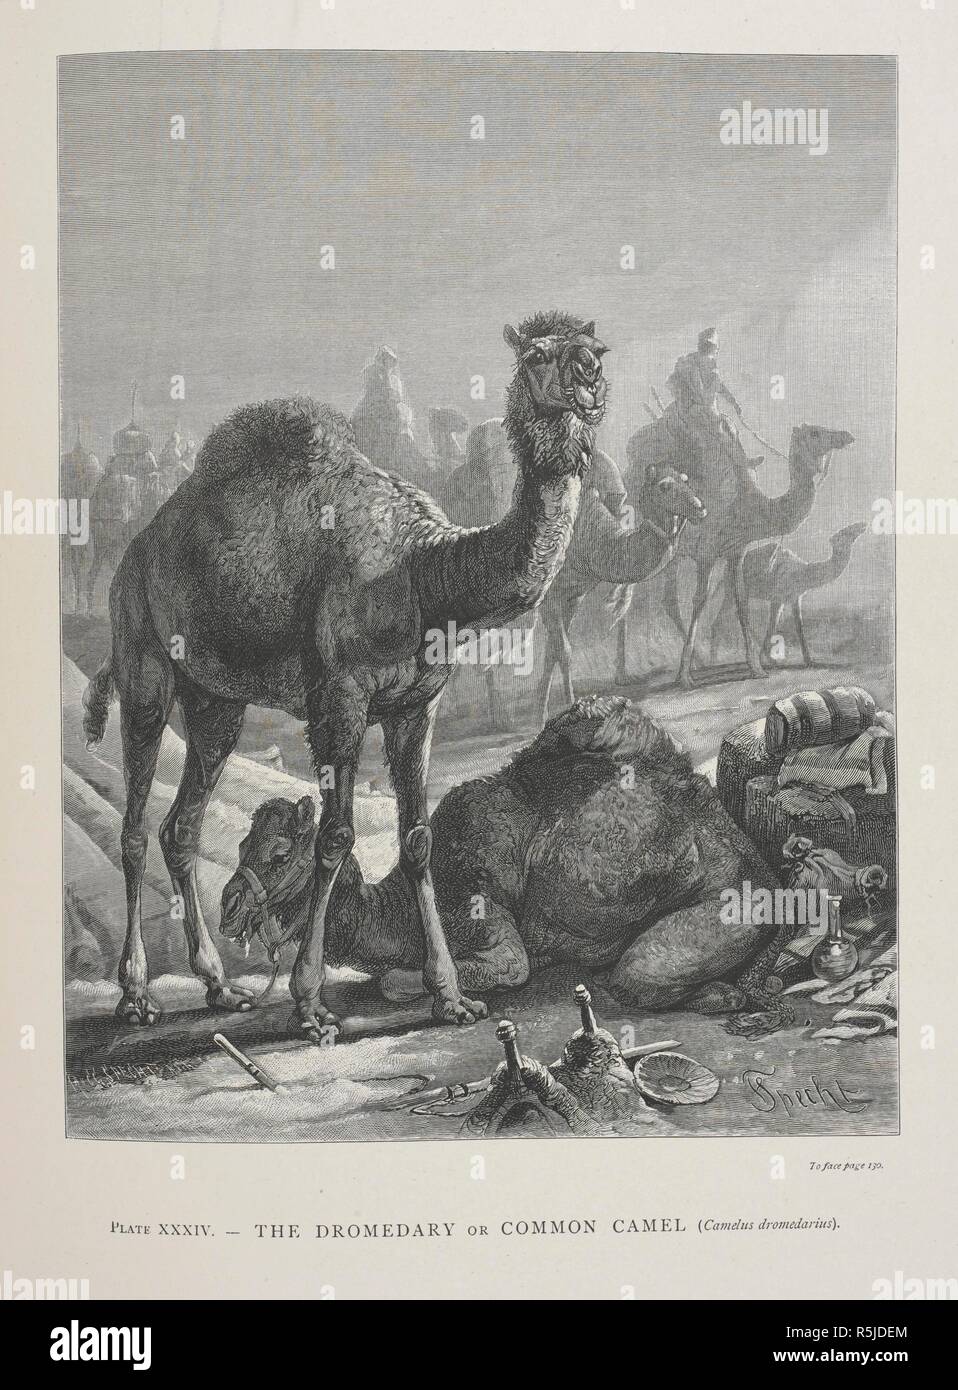 The Dromedary or Common Camel. The Geographical Distribution of Animals, with a study of the relations of living and extinct faunas as elucidating the past changes of the earth's surface. ... . London, 1876. Source: 07209.dd.1 plate XXXIV. Author: WALLACE, ALFRED RUSSEL. Stock Photo